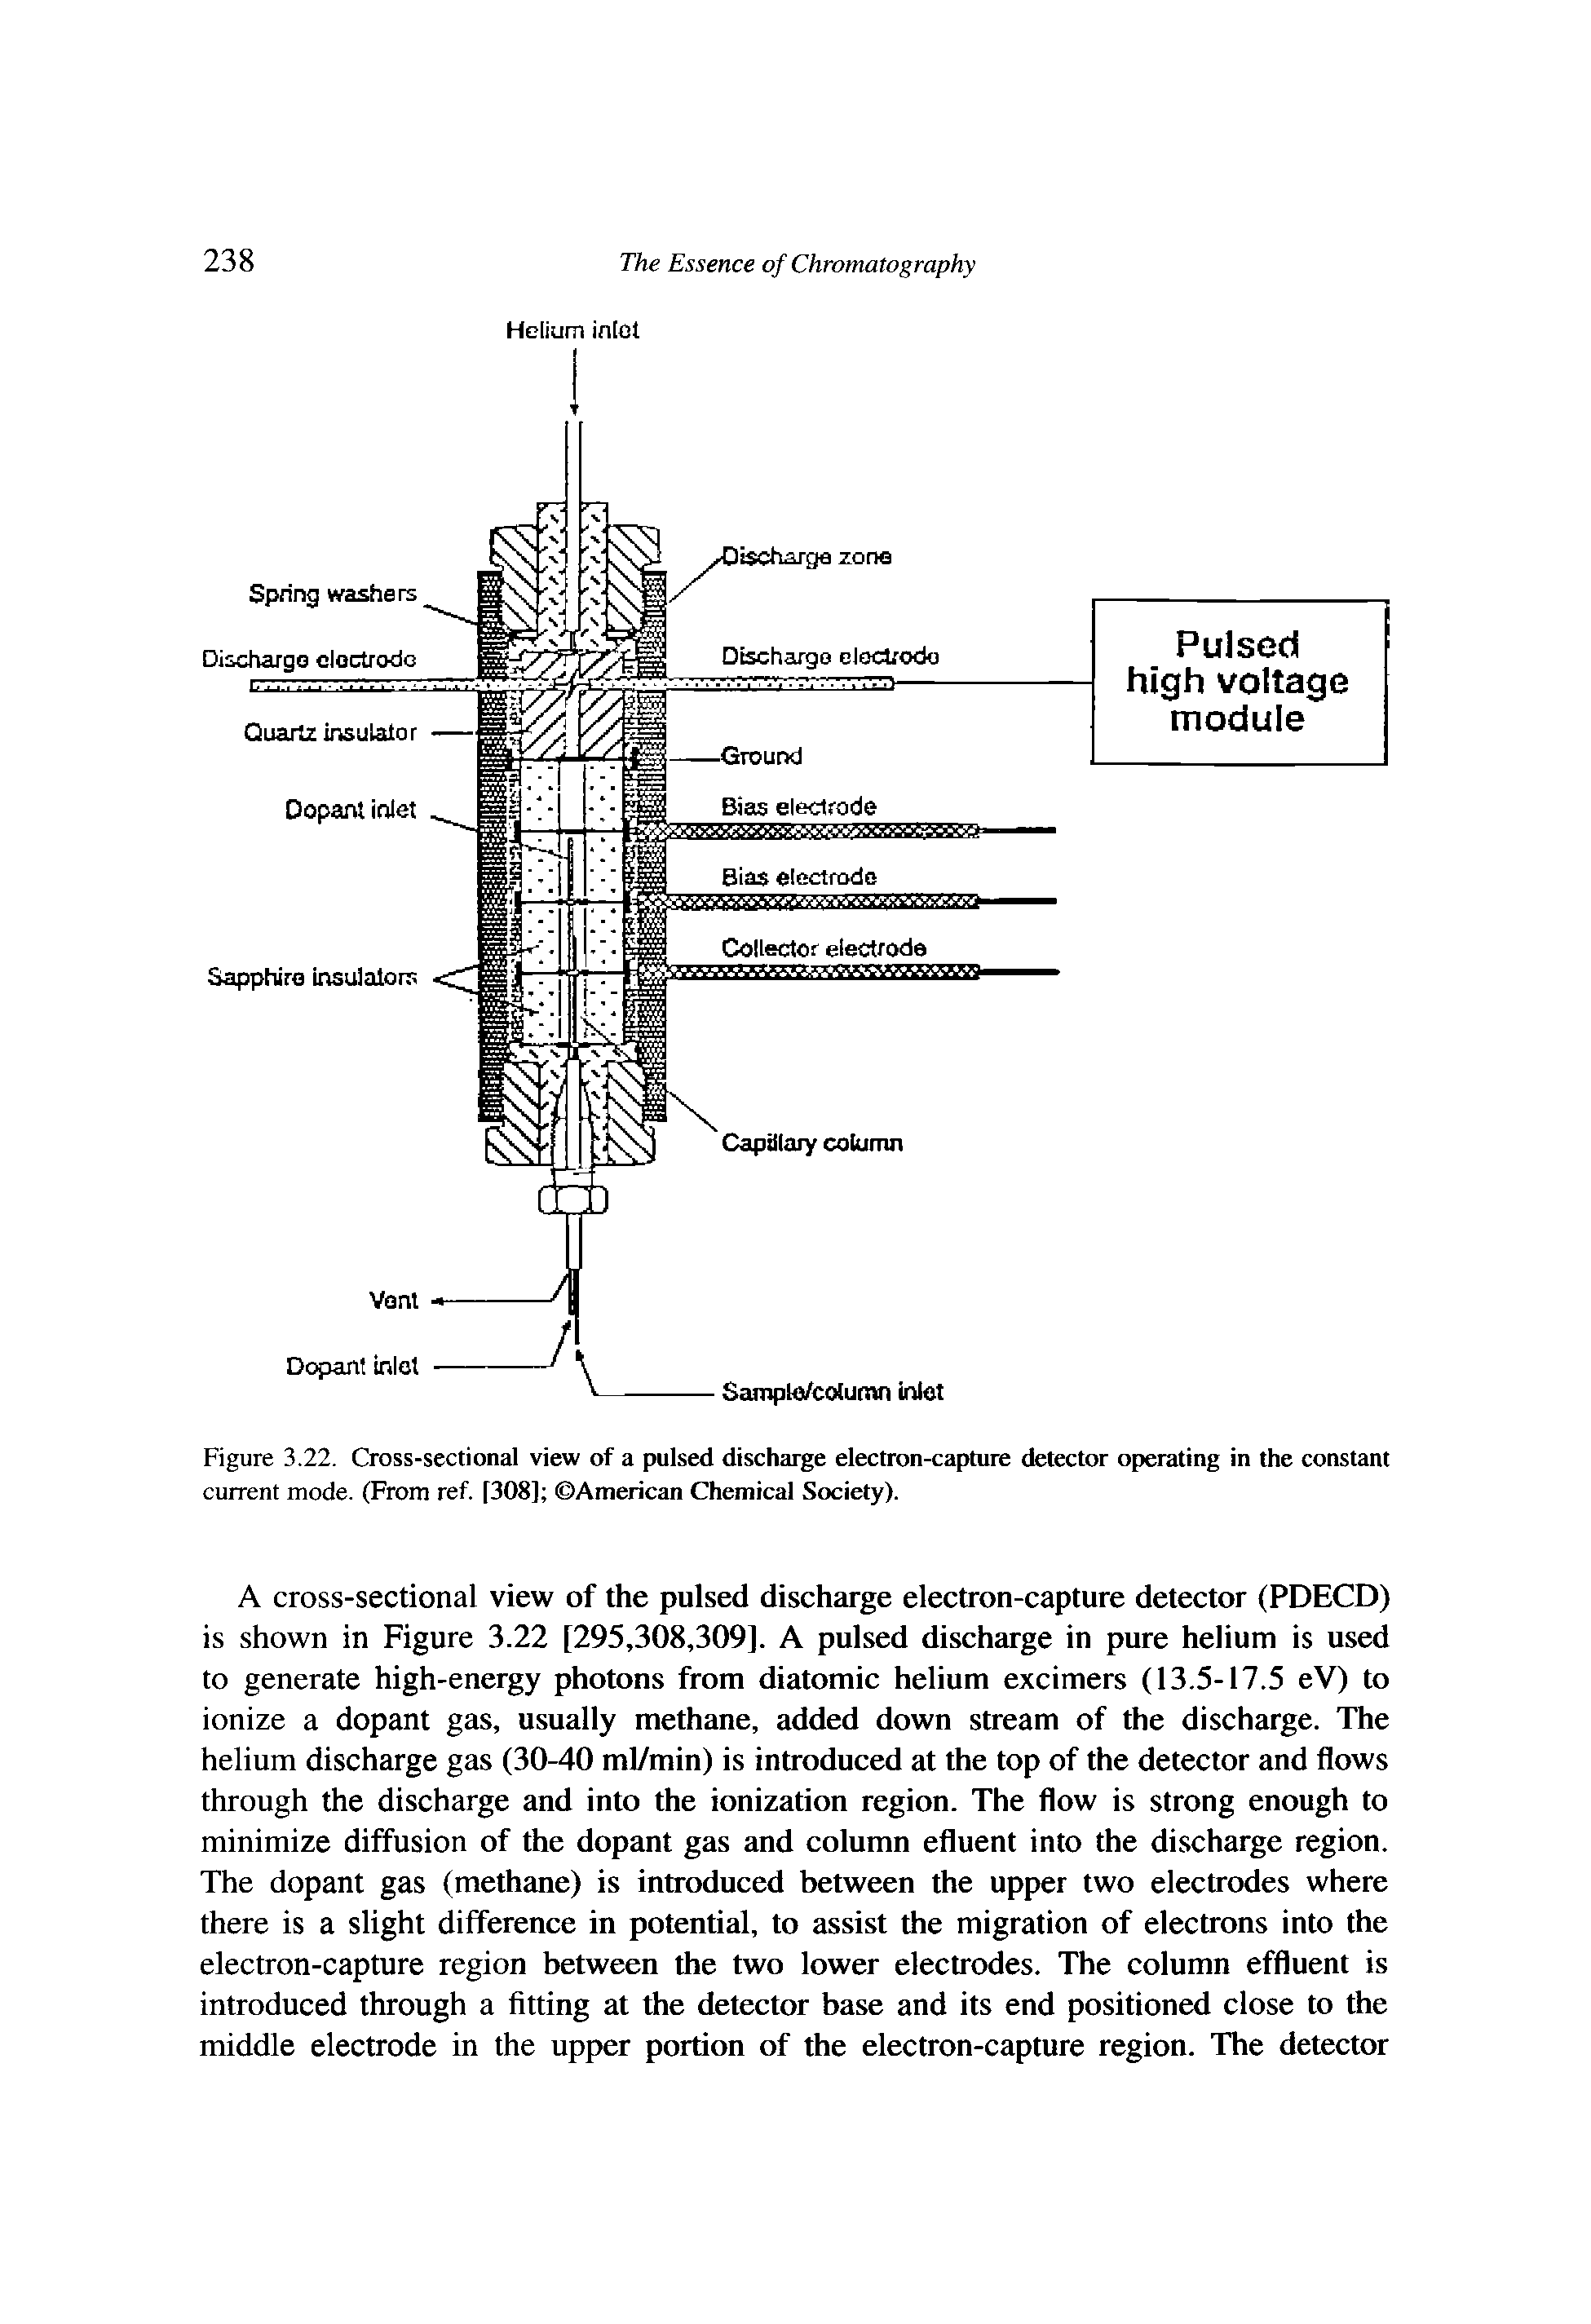 Figure 3.22. Cross-sectional view of a pulsed discharge electron-capture detector operating in the constant current mode. (From ref. [308] American Chemical Society).